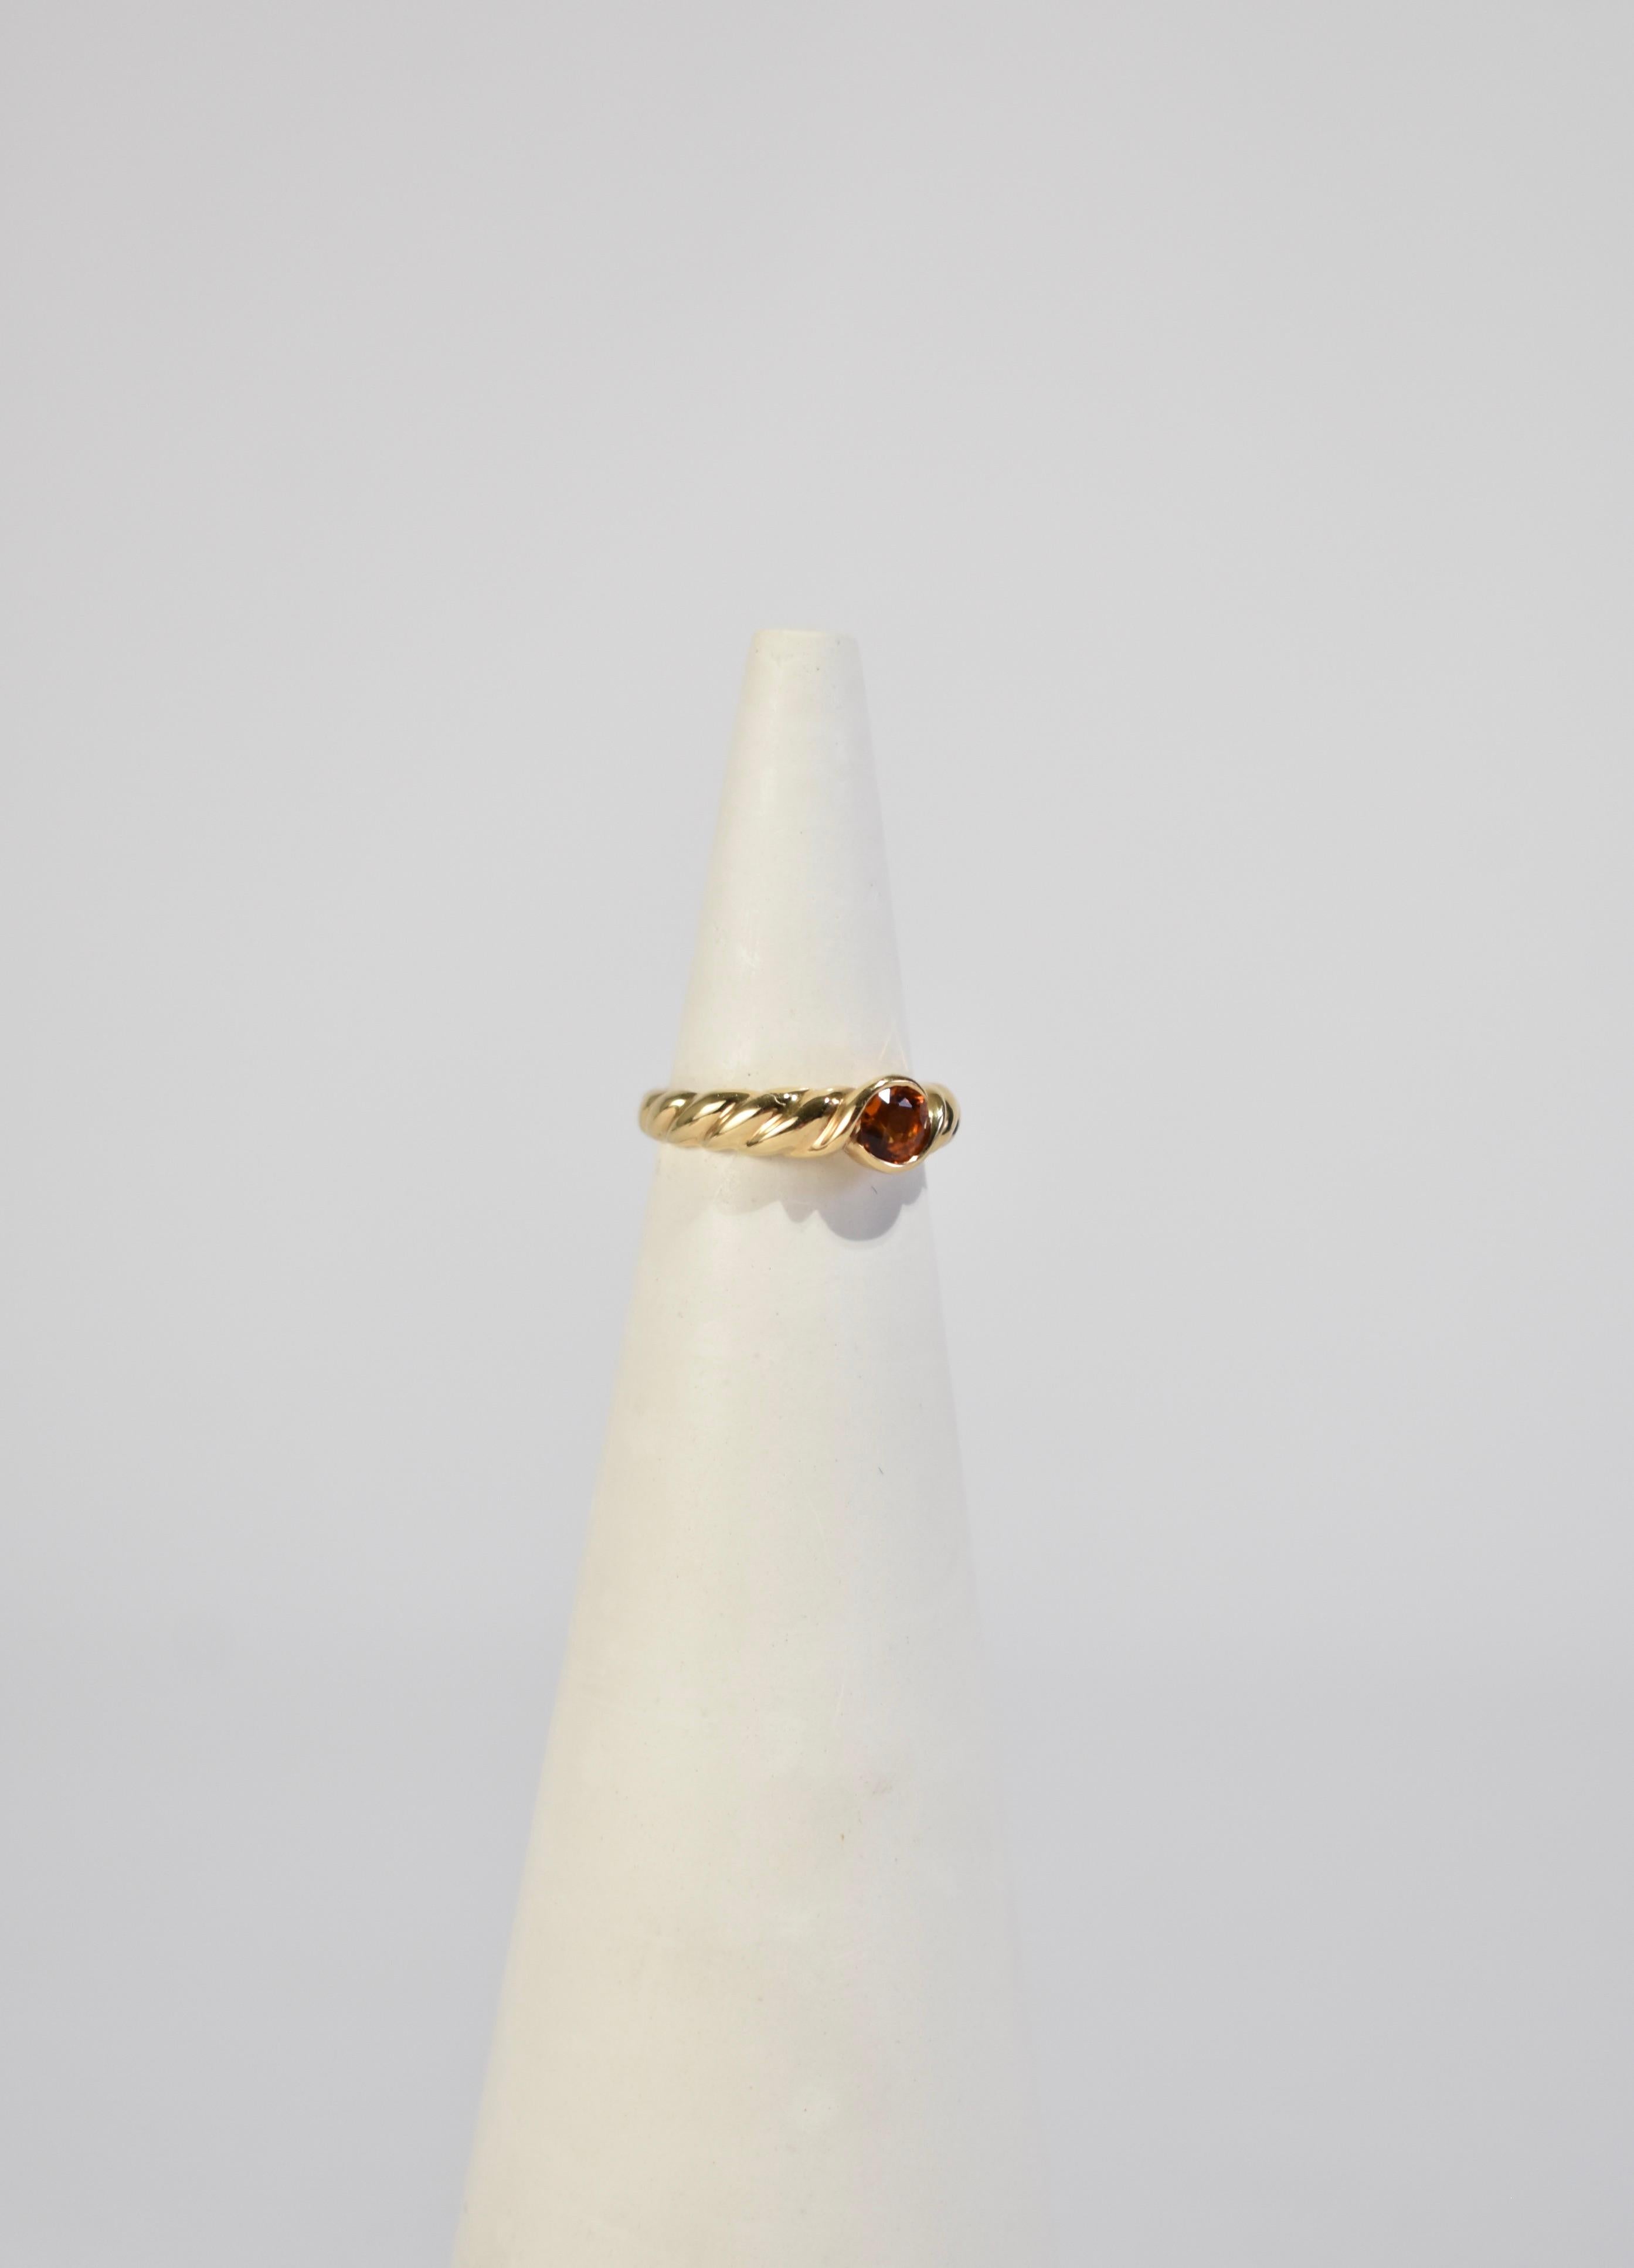 Stunning vintage gold ring with faceted topaz stone and ribbed detail. Stamped 14k.

Material: 14k gold, topaz.

